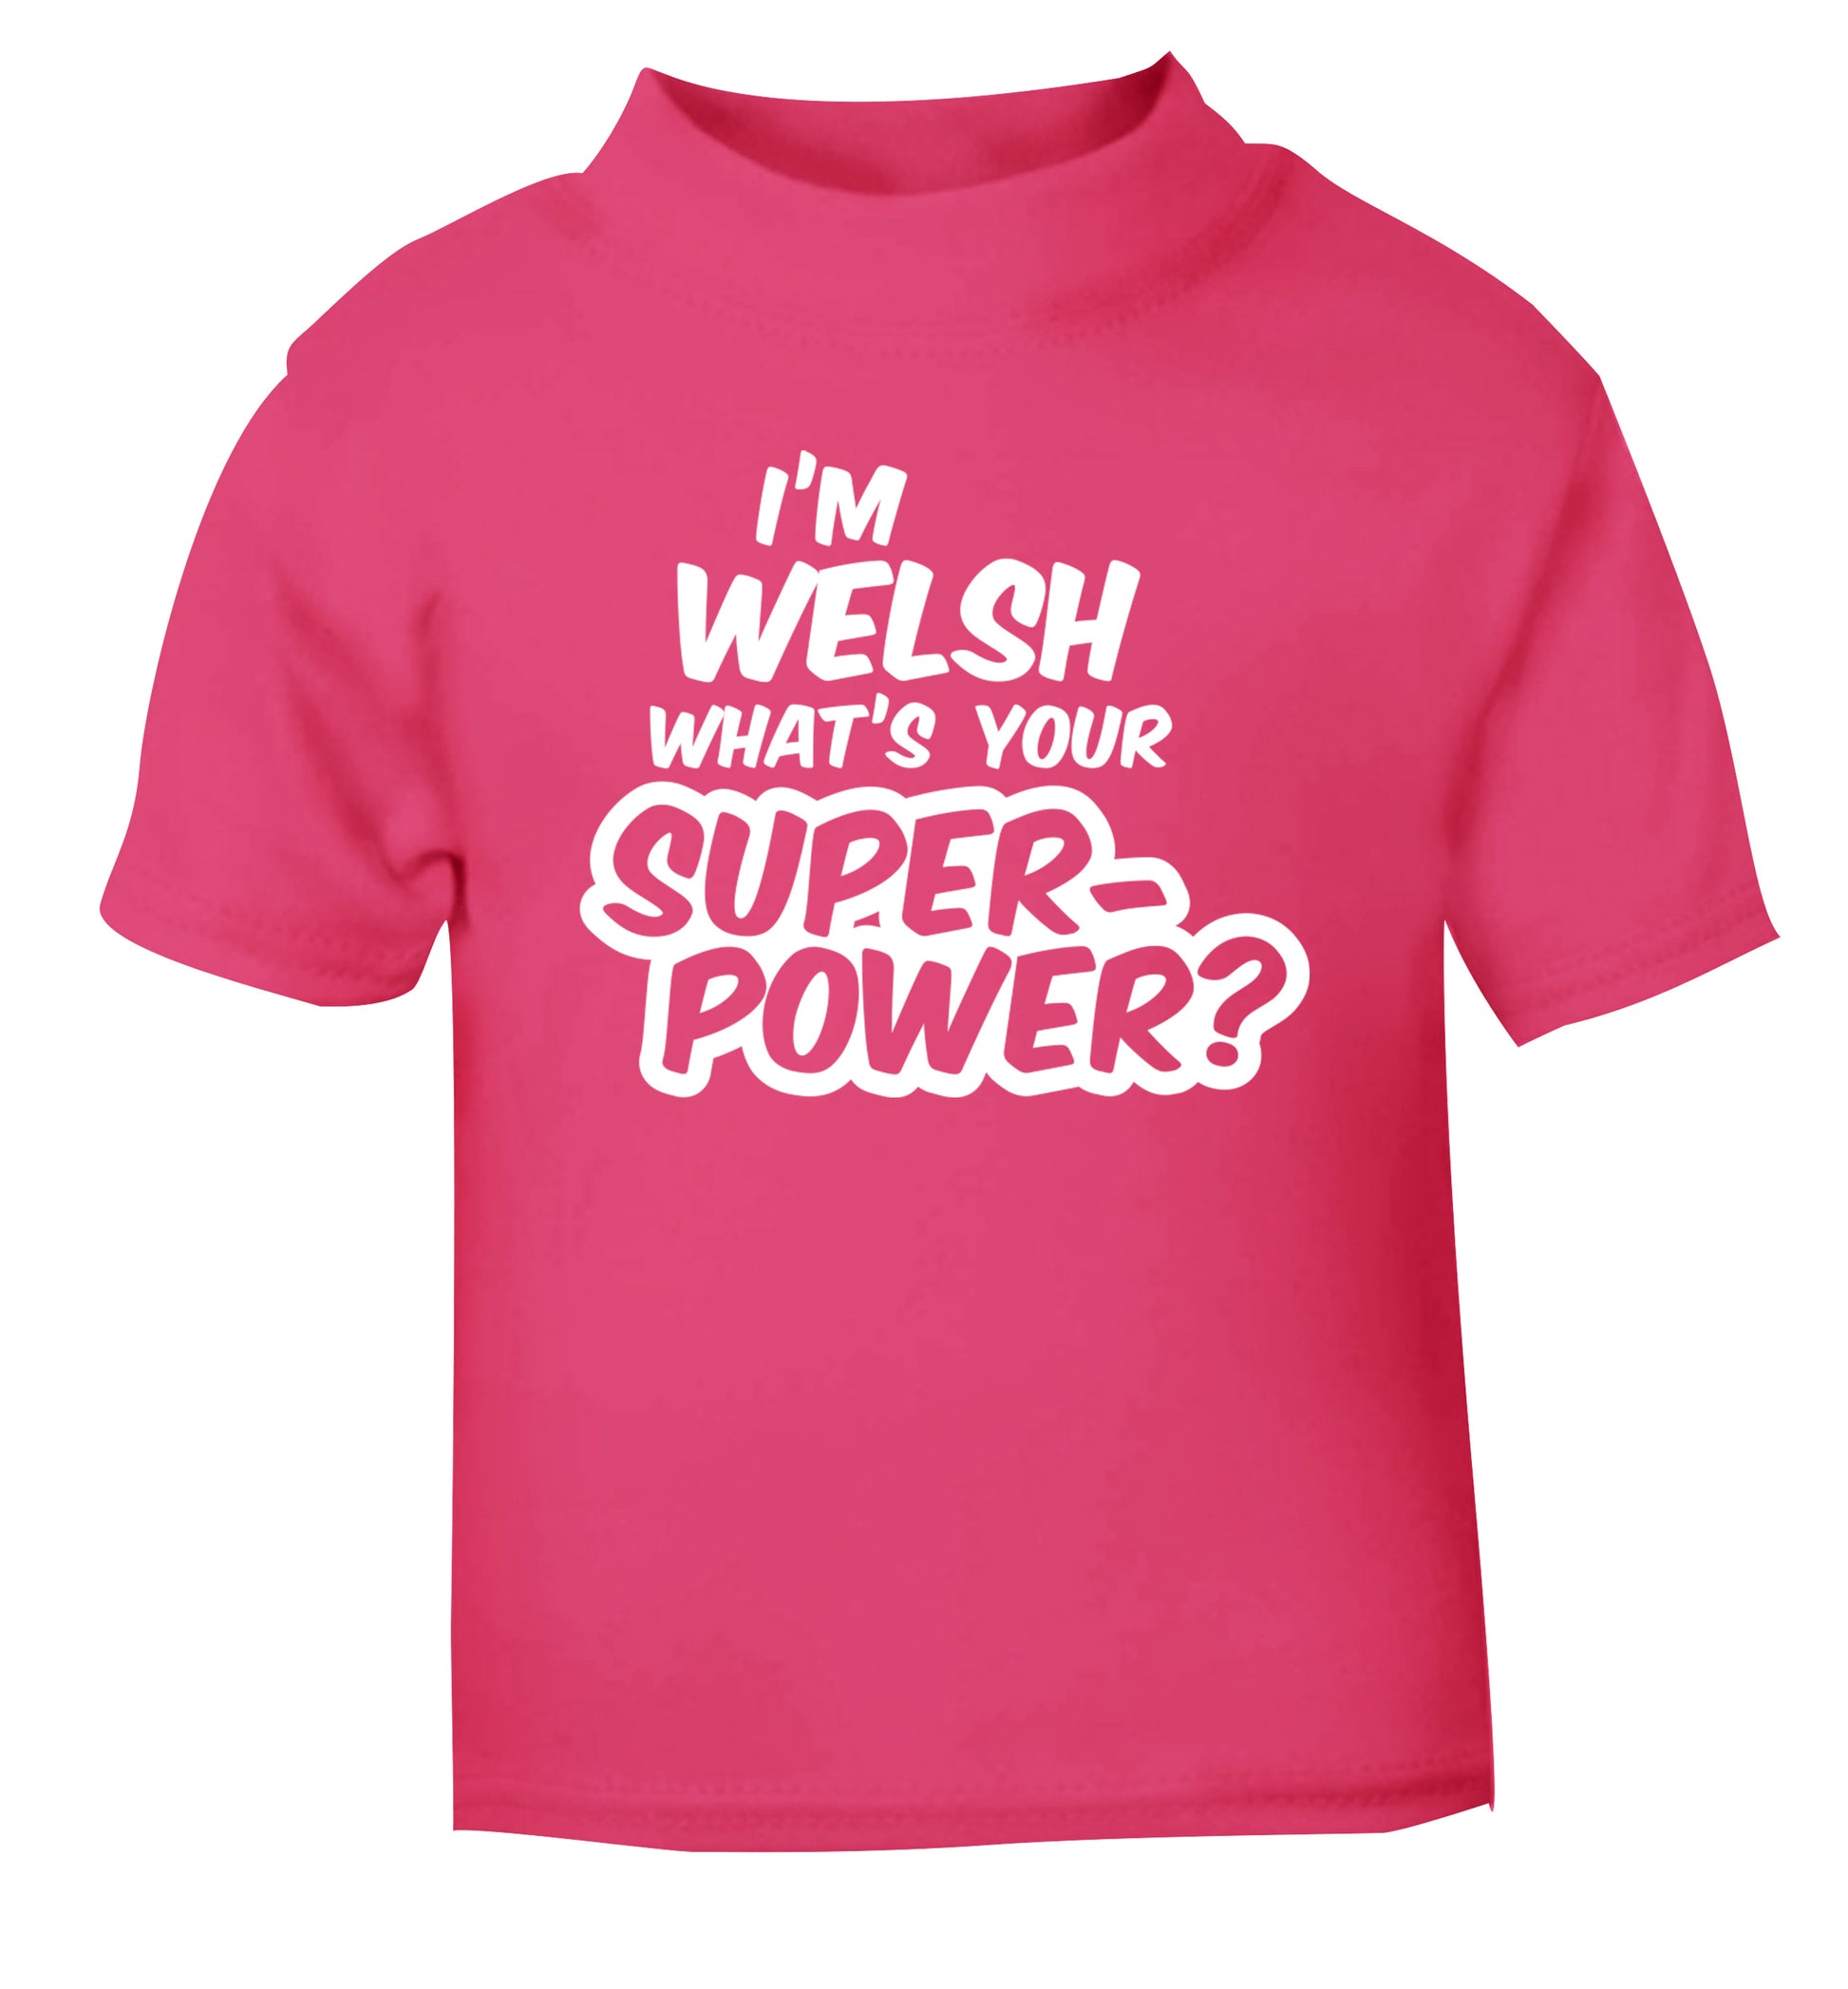 I'm Welsh what's your superpower? pink Baby Toddler Tshirt 2 Years